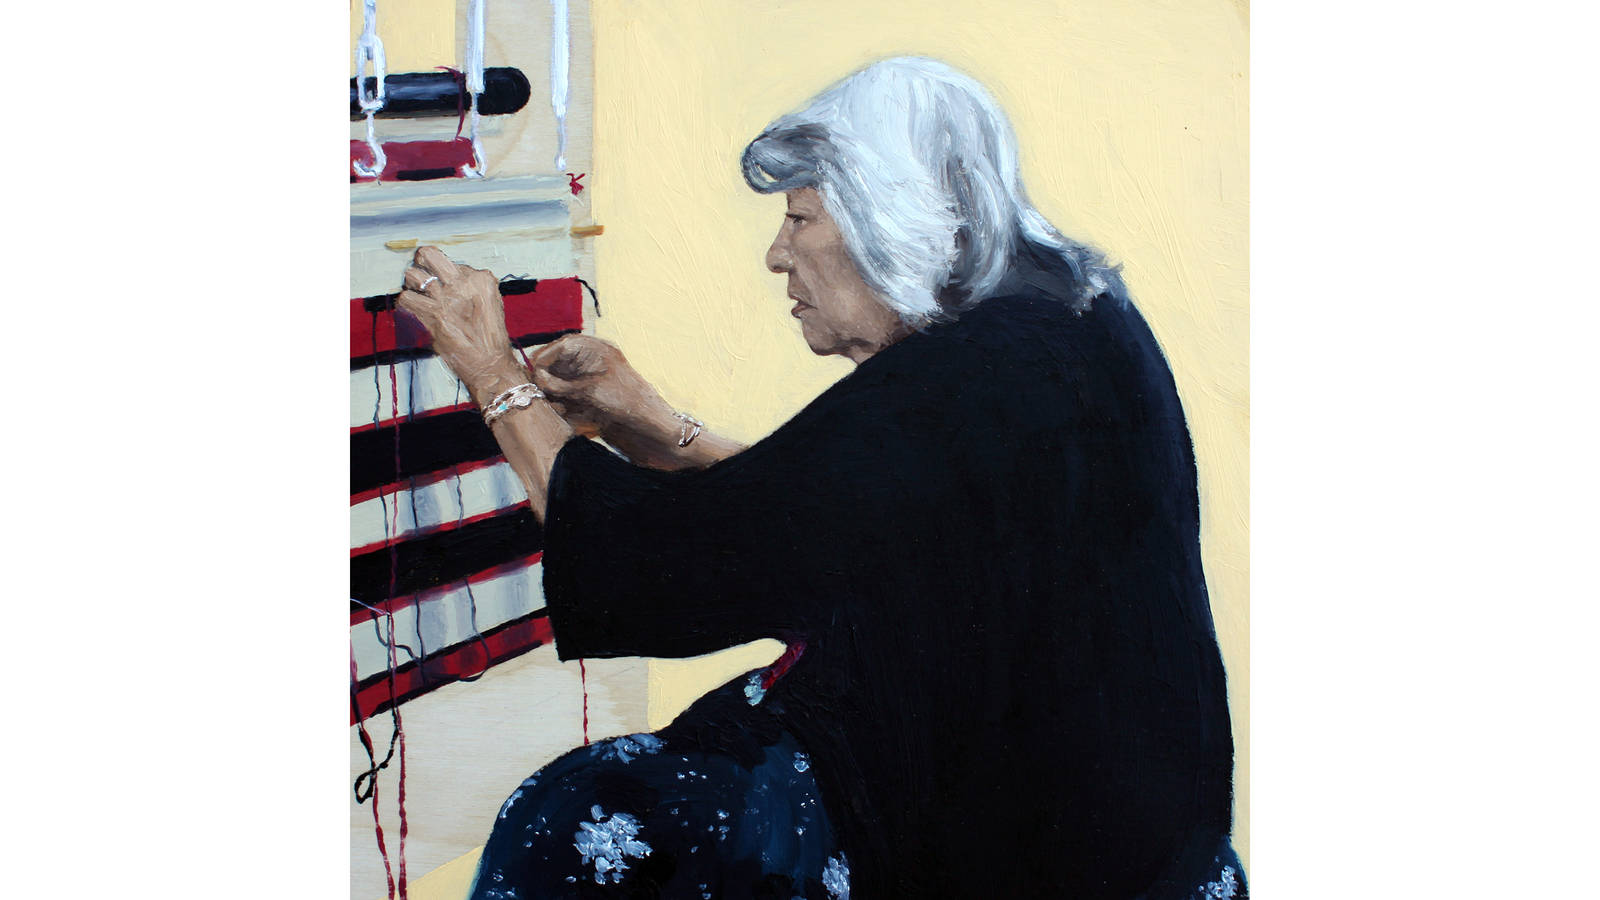 <h3 style="text-align: center; padding: 50px;"><span class="text-Intro-style">Ruby Hubbard, a Navajo weaver, demonstrates her craft at the Hubbell Trading Post National Historic Site. Oil on wood, 2019.</span></h3>